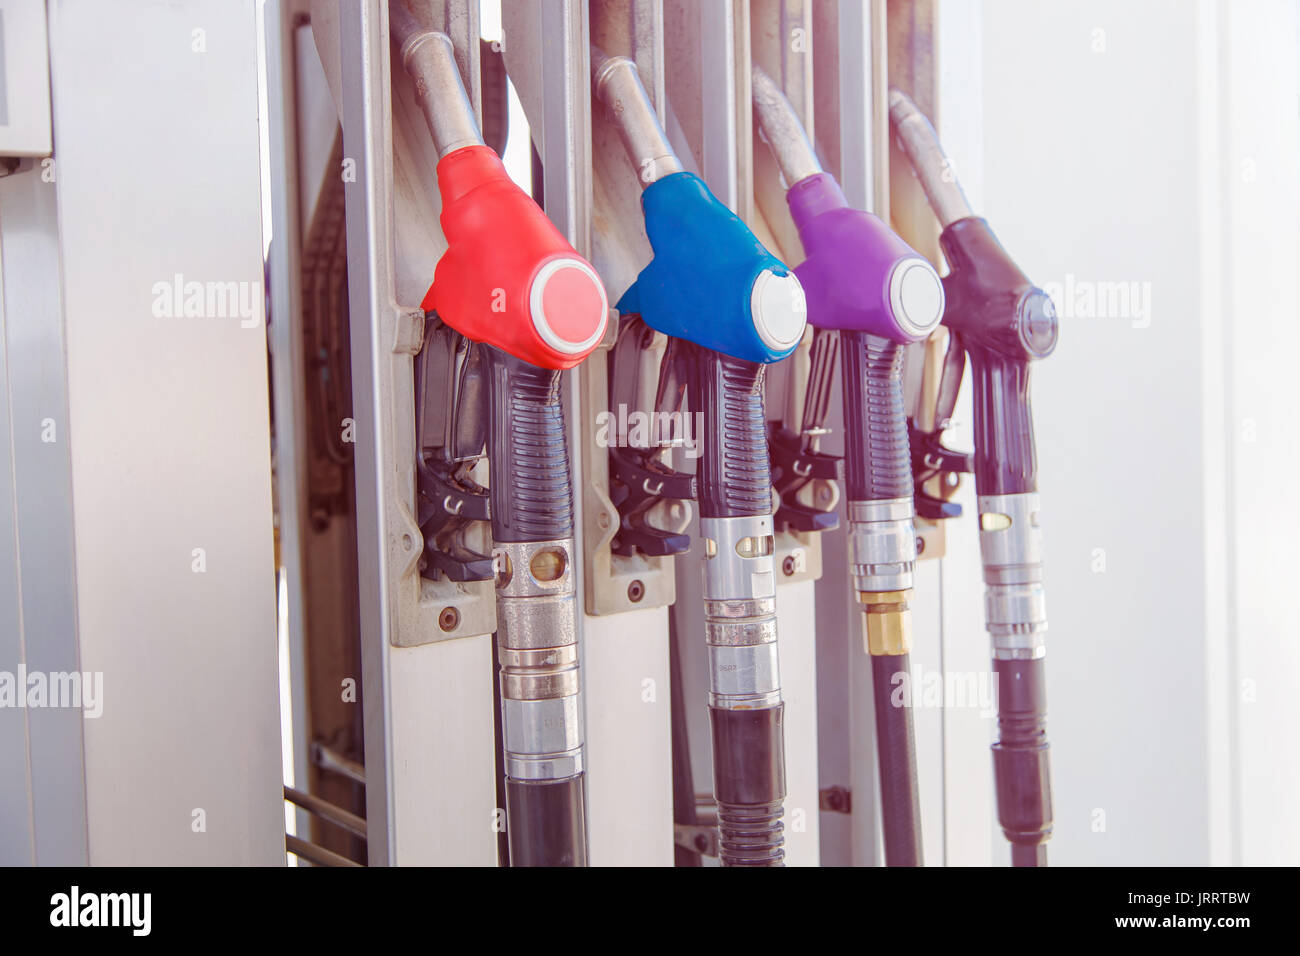 Fuel pump with gasoline and diesel handles dispenser at petrol filling station. Stock Photo